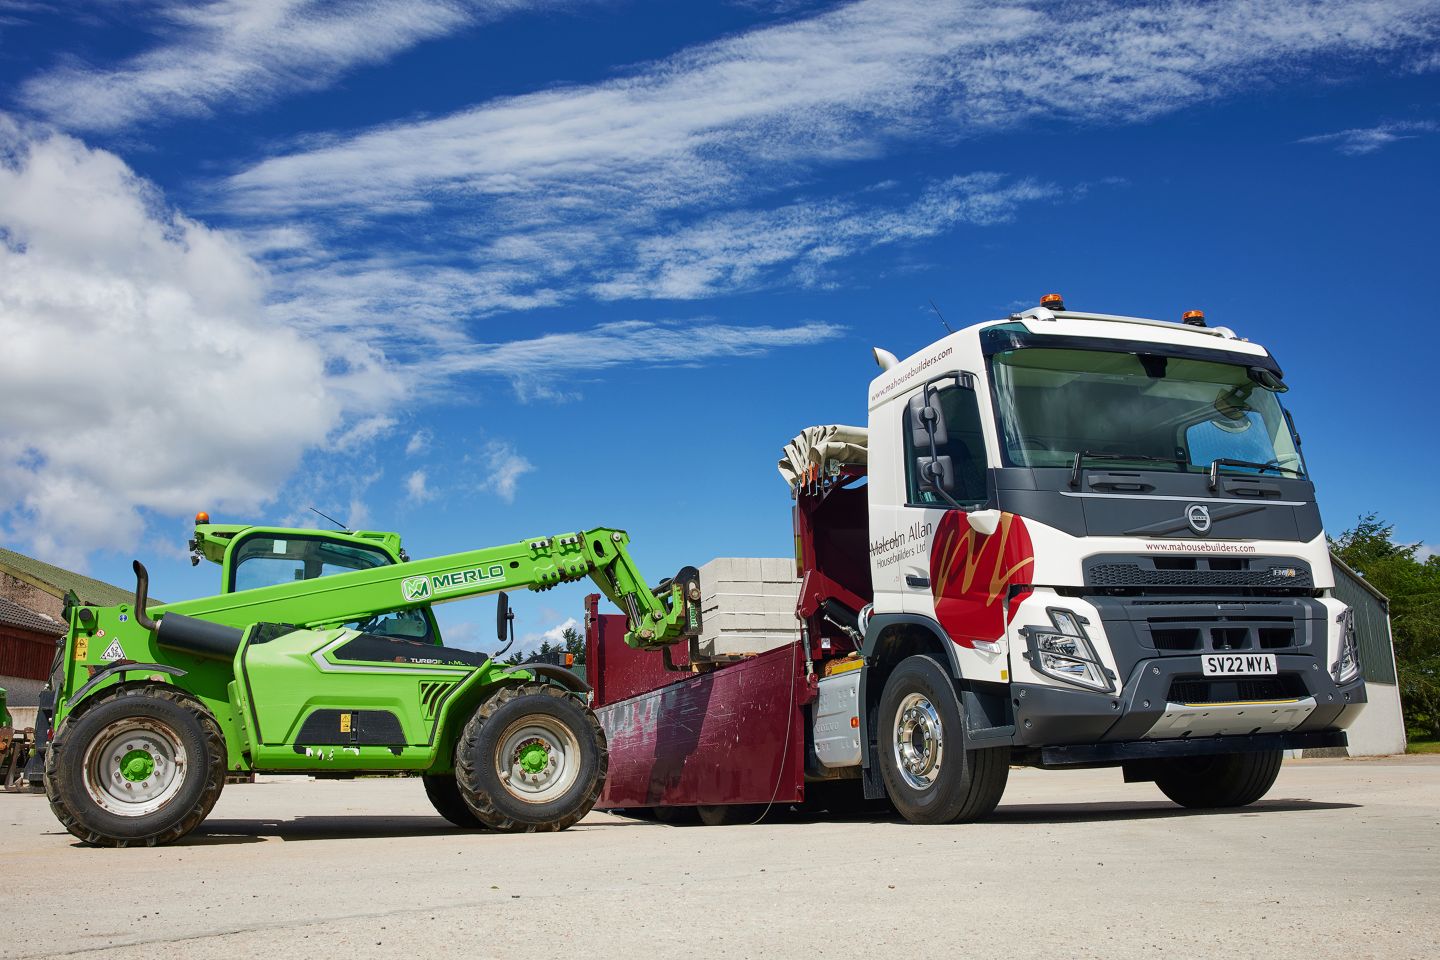 Volvo FMX 460: Beefy at the Construction Site - TruckScout24 Blog